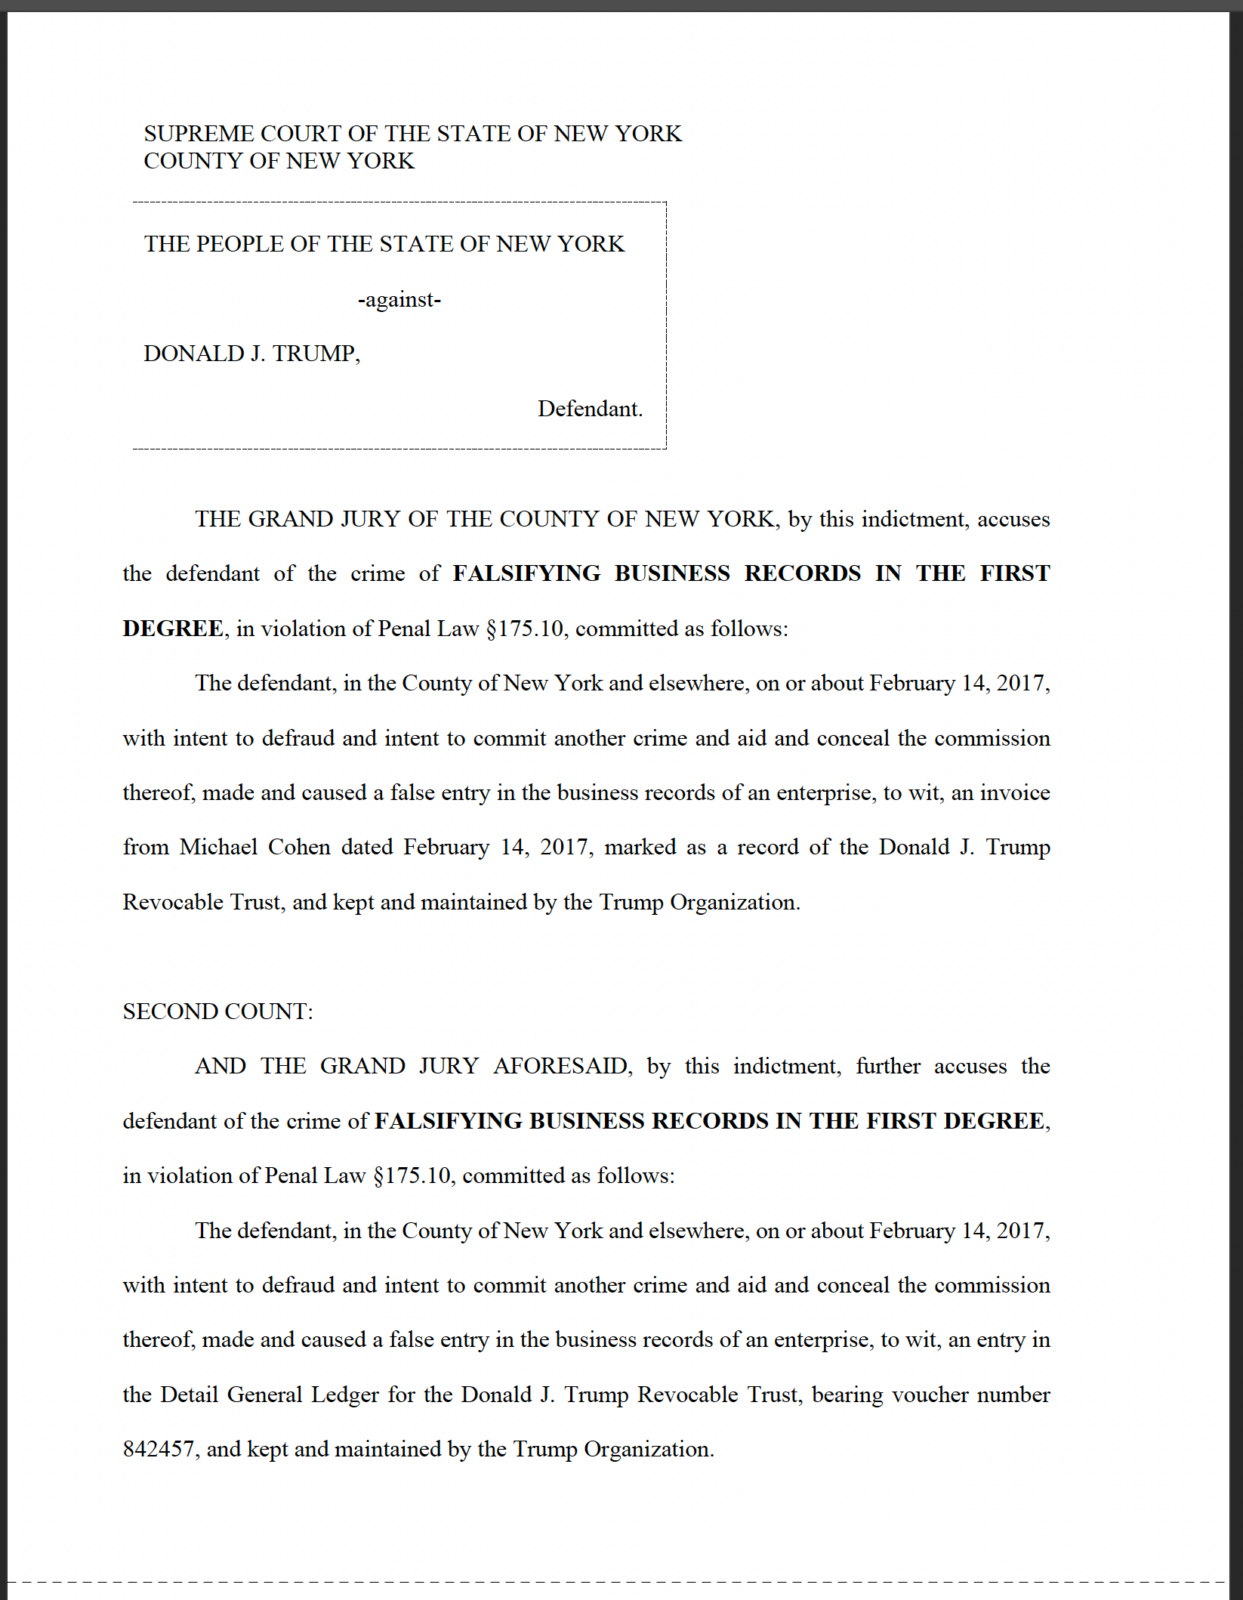 Download the indictment (PDF)